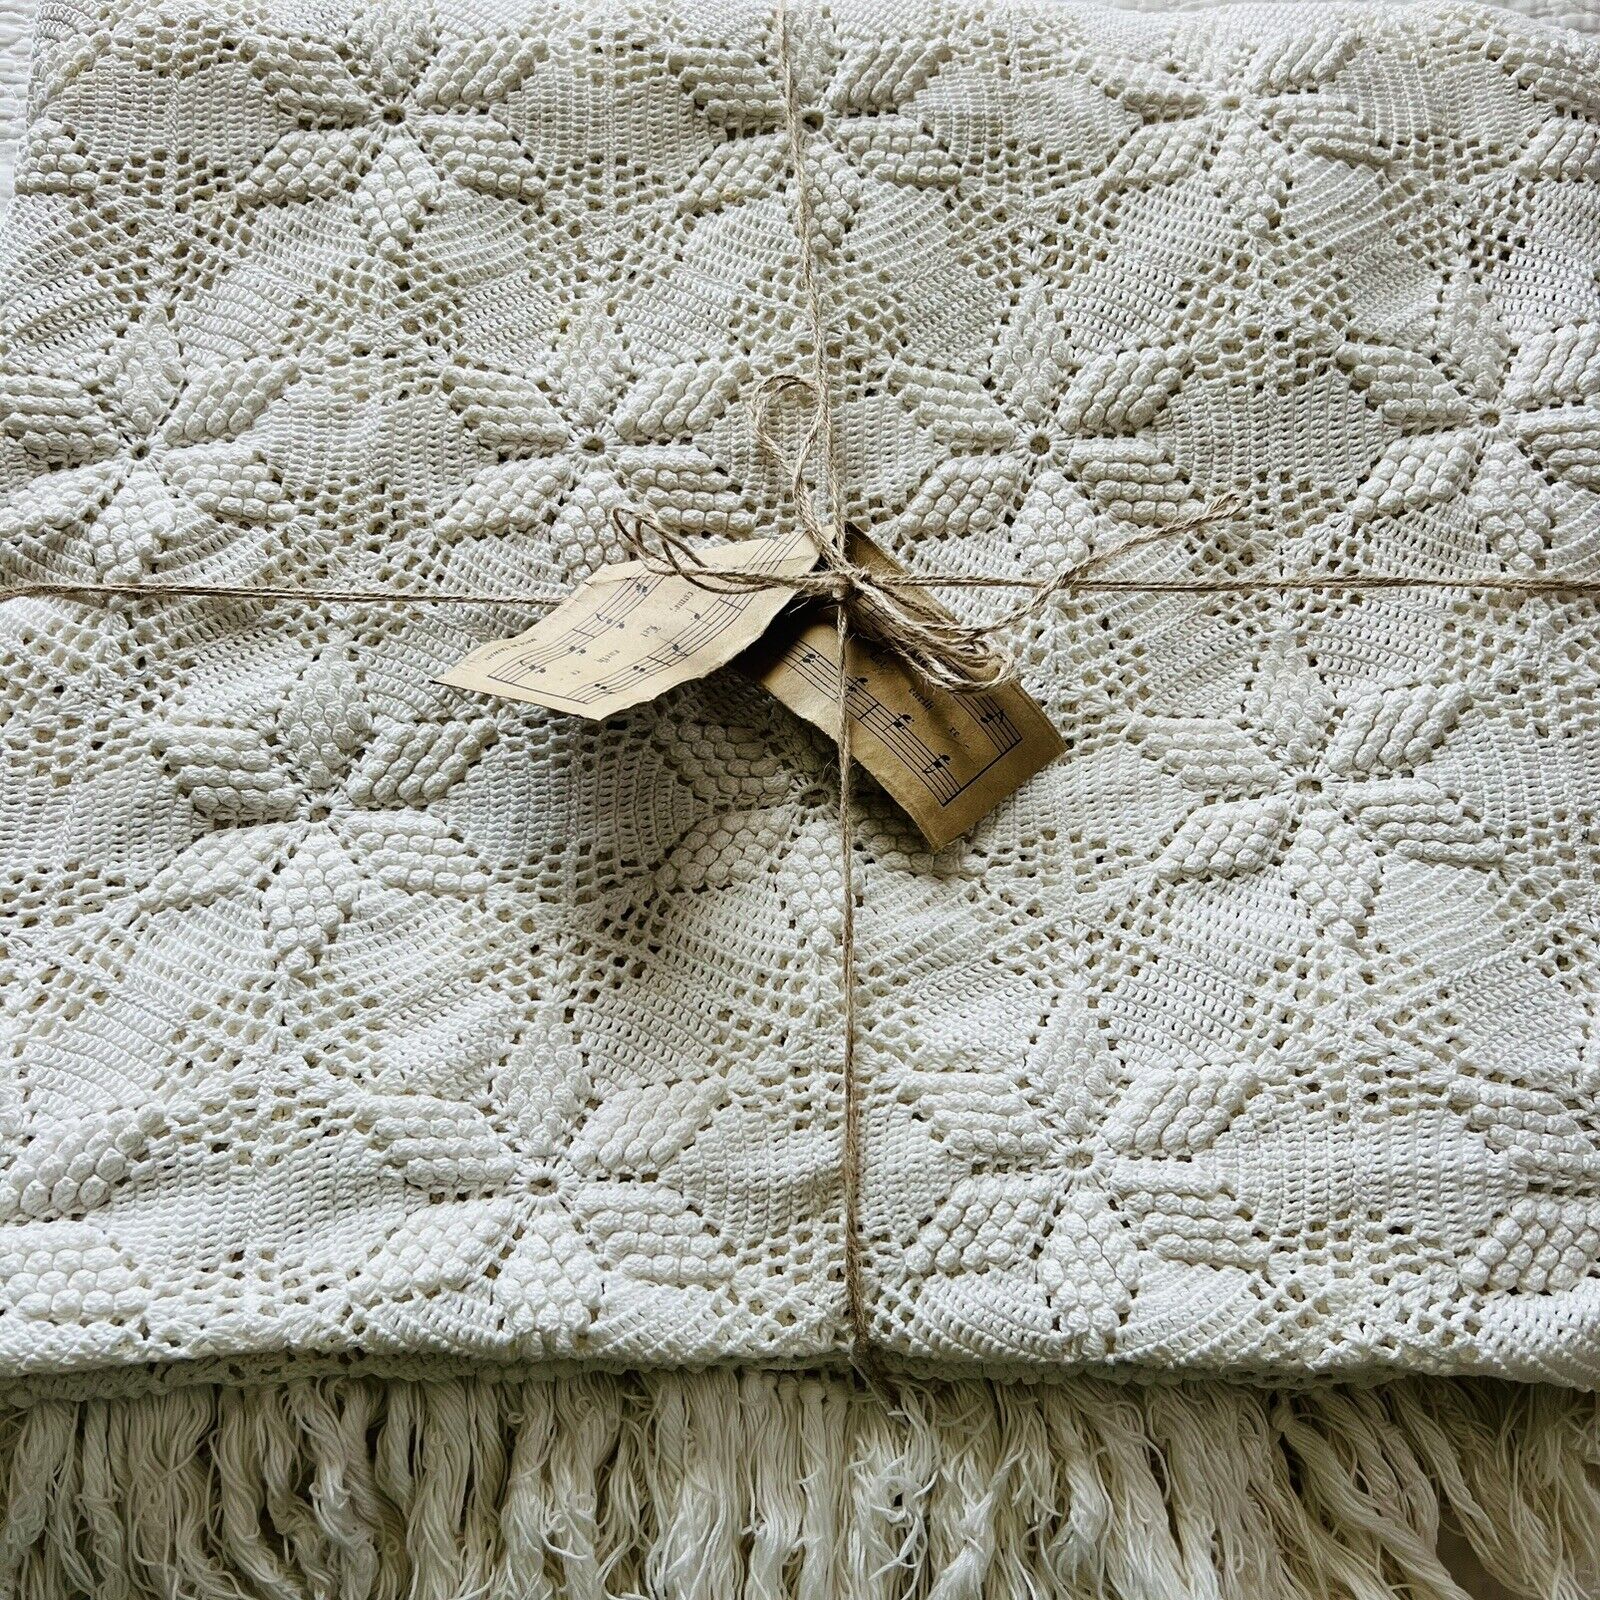 100”x82” Vintage Hand Crocheted Ivory Bedspread With Fringe.